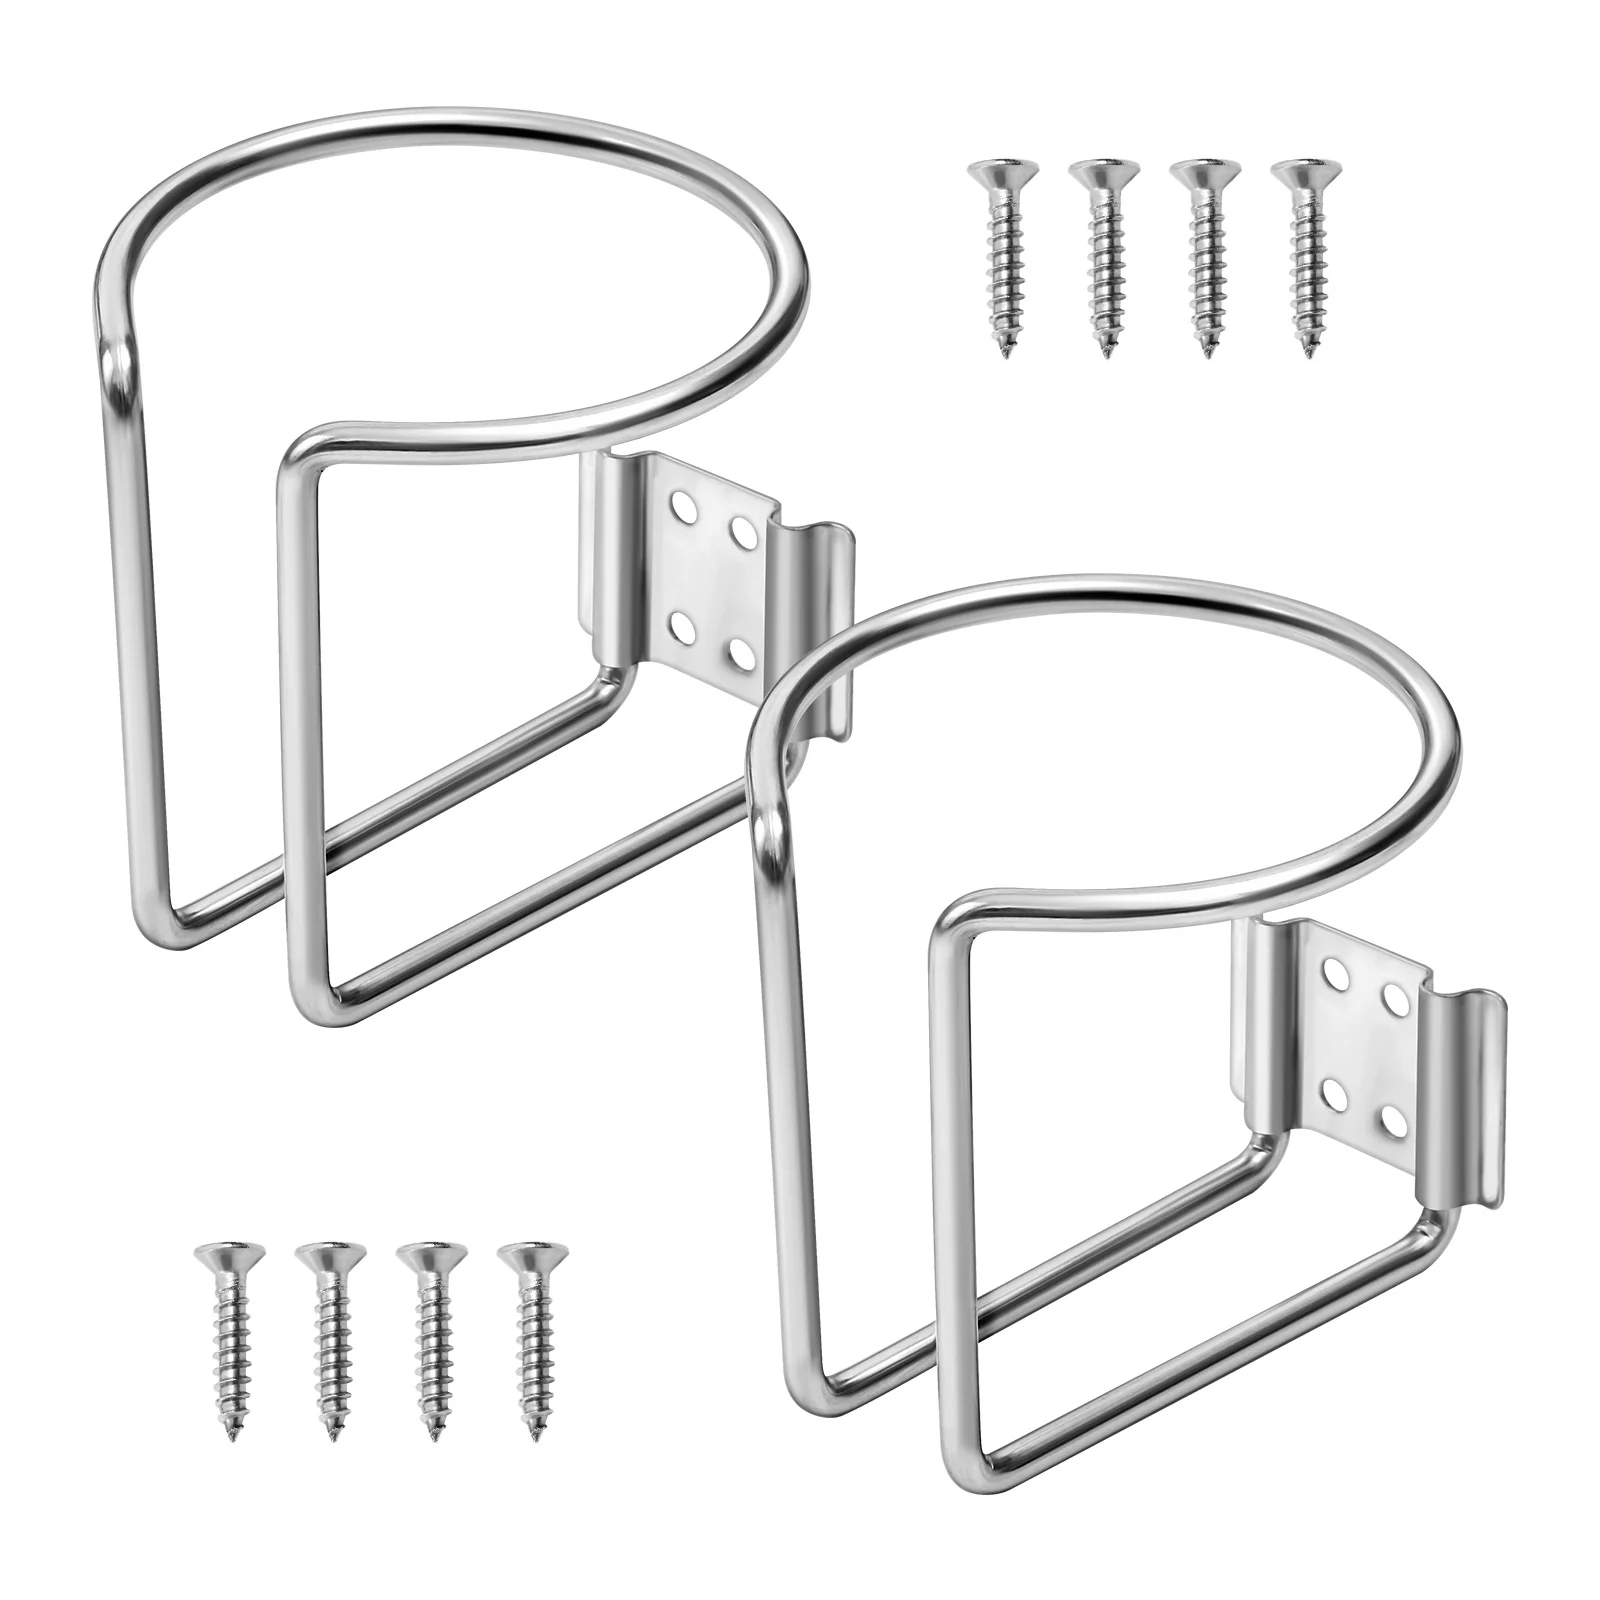 

Holder Drink Cup Boat Holders Automotive Bike Couch Pool Car Boats Deck Party Hinges Cabinet Mount Wall Stainless Outdoor